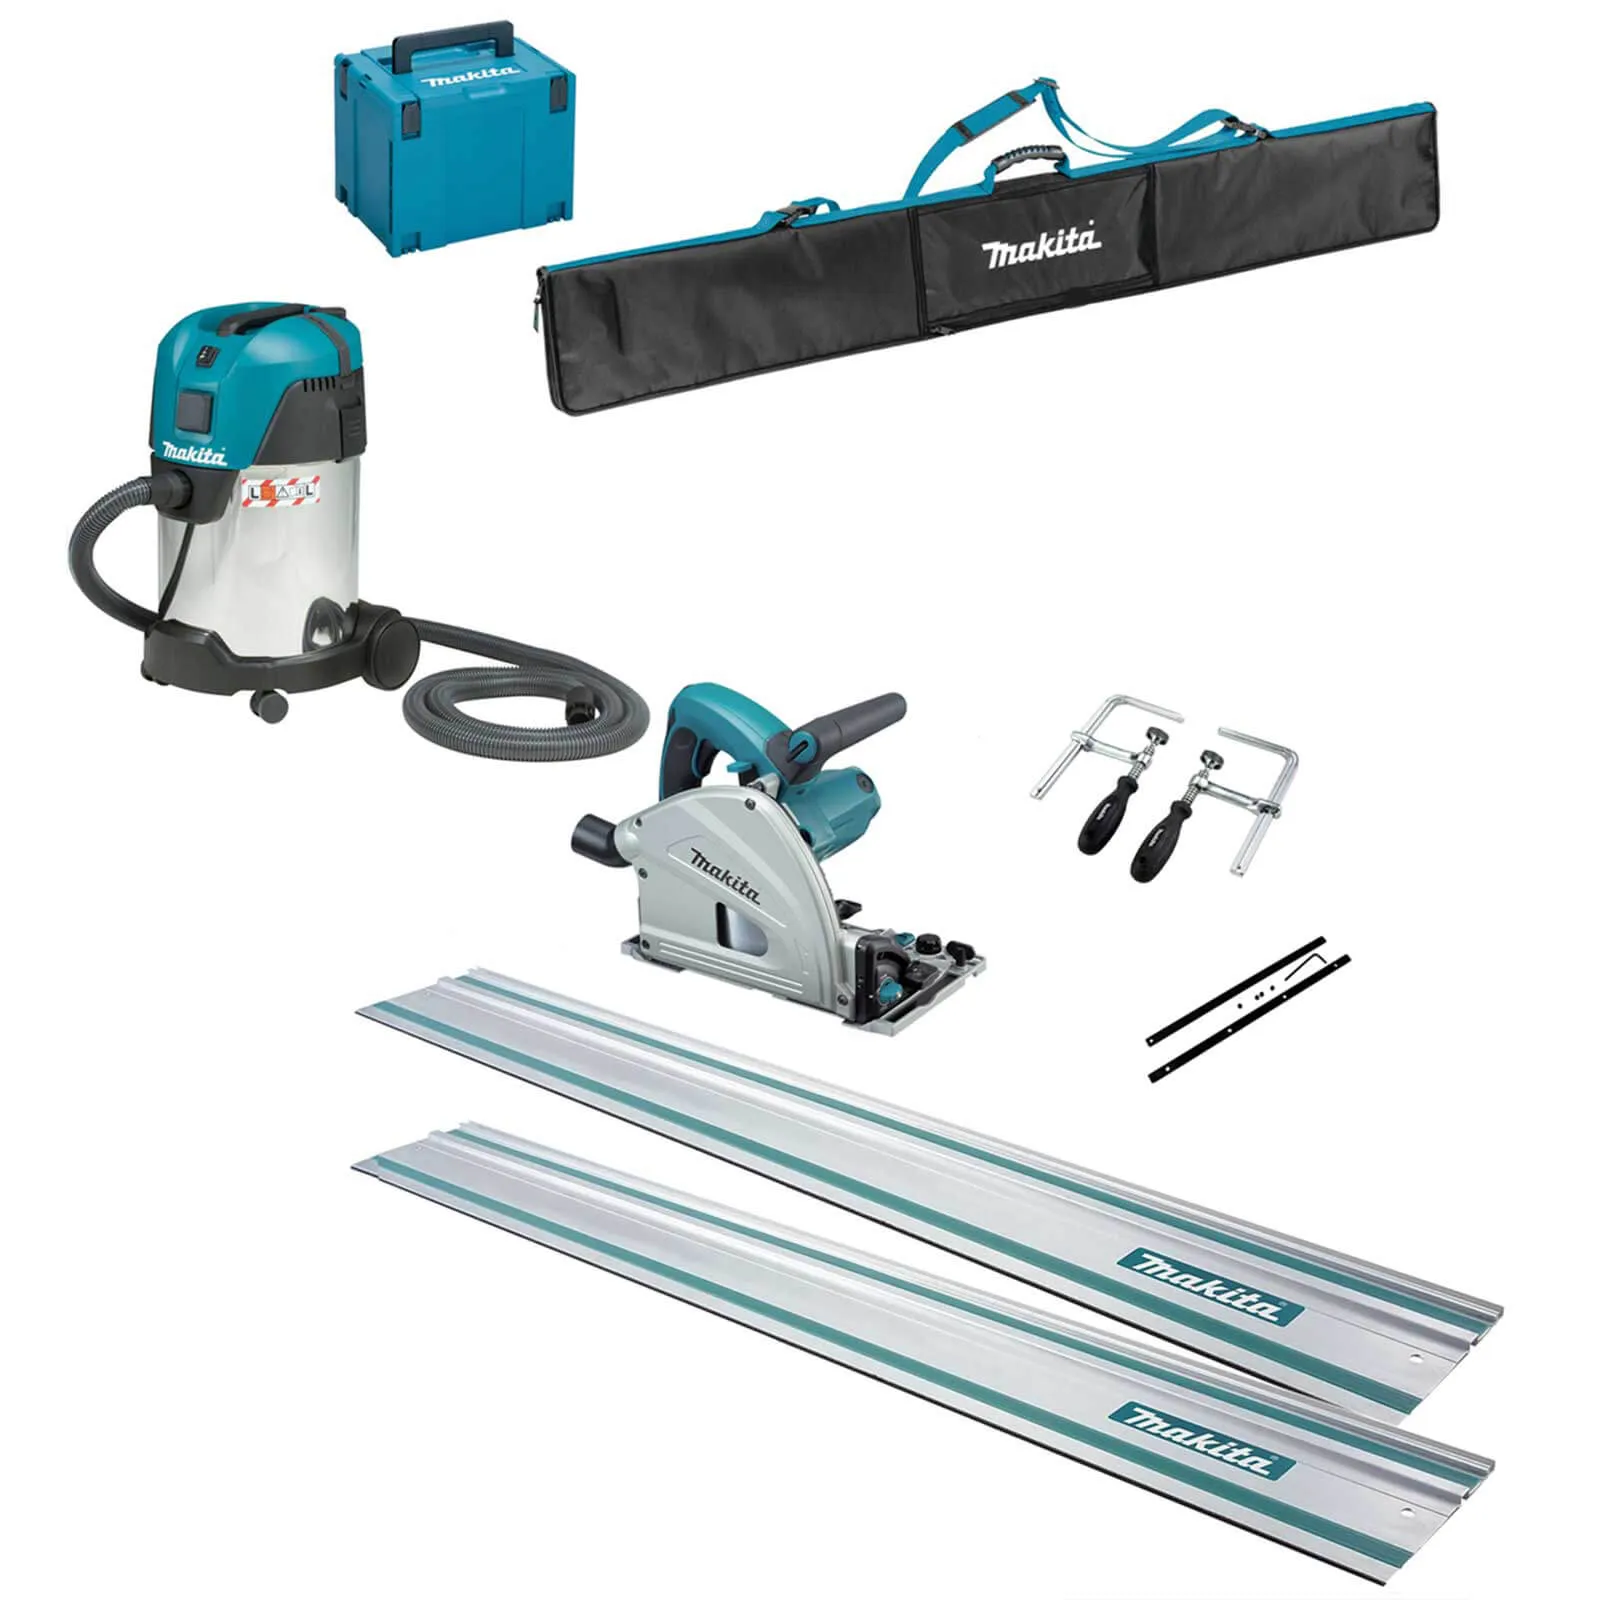 Makita SP6000K7 Plunge Cut Circular Saw and Guide Rail Accessory 7 Piece Set - 240v